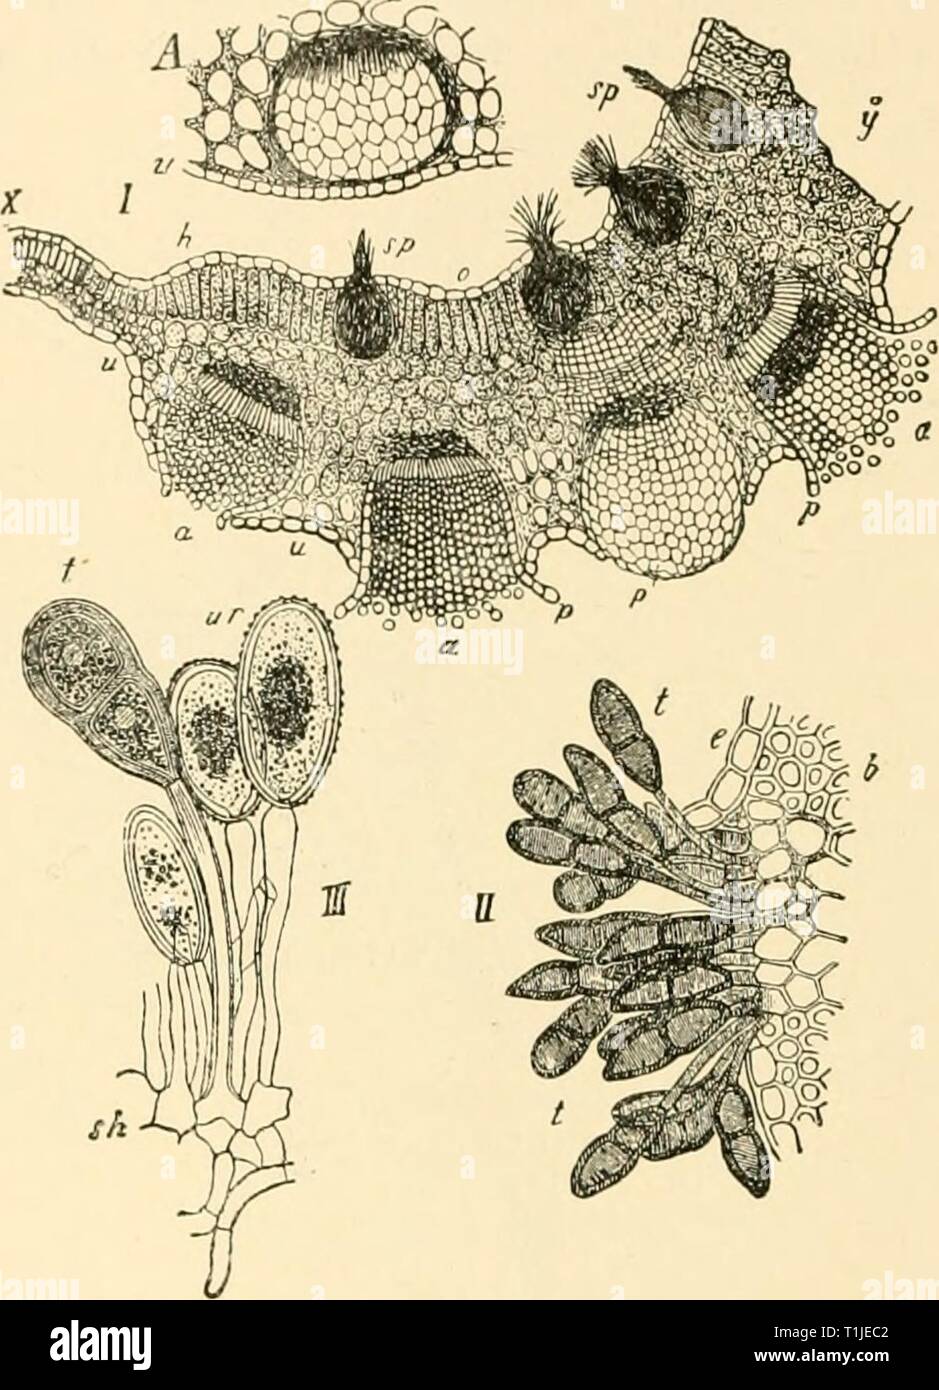 Diseases of plants induced by Diseases of plants induced by cryptogamic parasites; introduction to the study of pathogenic Fungi, slime-Fungi, bacteria, & Algae  diseasesofplants00tube Year: 1897  34-t UKEDINKAE. tlirougli the e})iderniis. The yellow uredospores are abjointed singly from long sporophores ; they are unicellular and ovoid, with a thin granular coat beset with germ-pores (Fig. 184). The uredo- spores are easily conveyed to other grass-plants and germinate at once, their germ-tubes entering by a stoma and developing into a mycelium, which can produce a new crop of uredospores in a Stock Photo